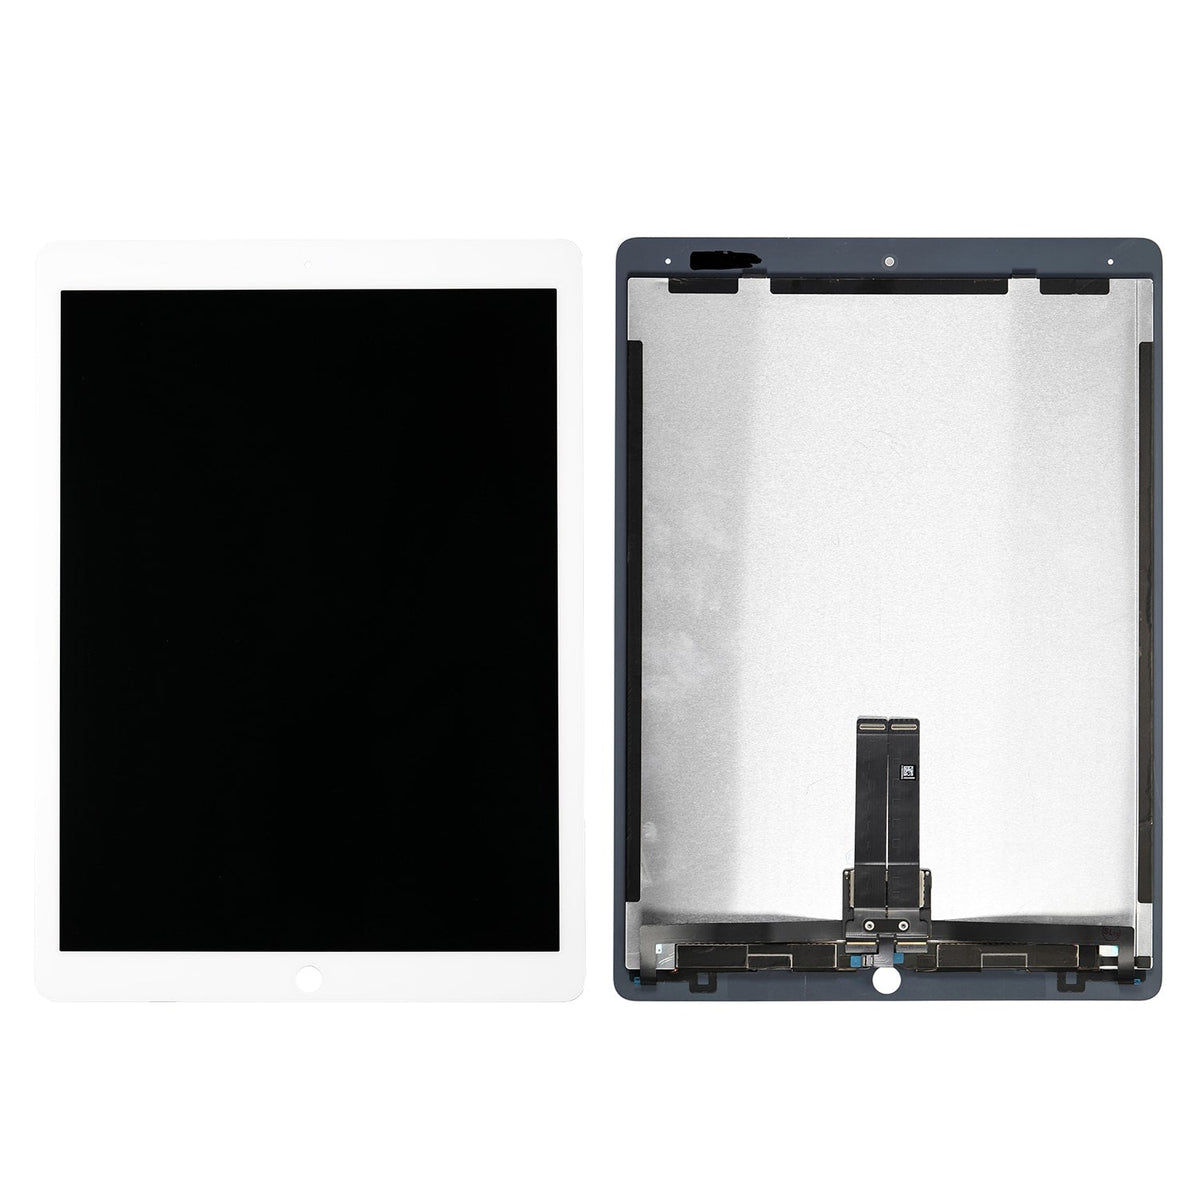 LCD SCREEN AND DIGITIZER ASSEMBLY WITH BOARD FLEX FOR IPAD PRO 12.9" 2ND GEN- (WHITE)